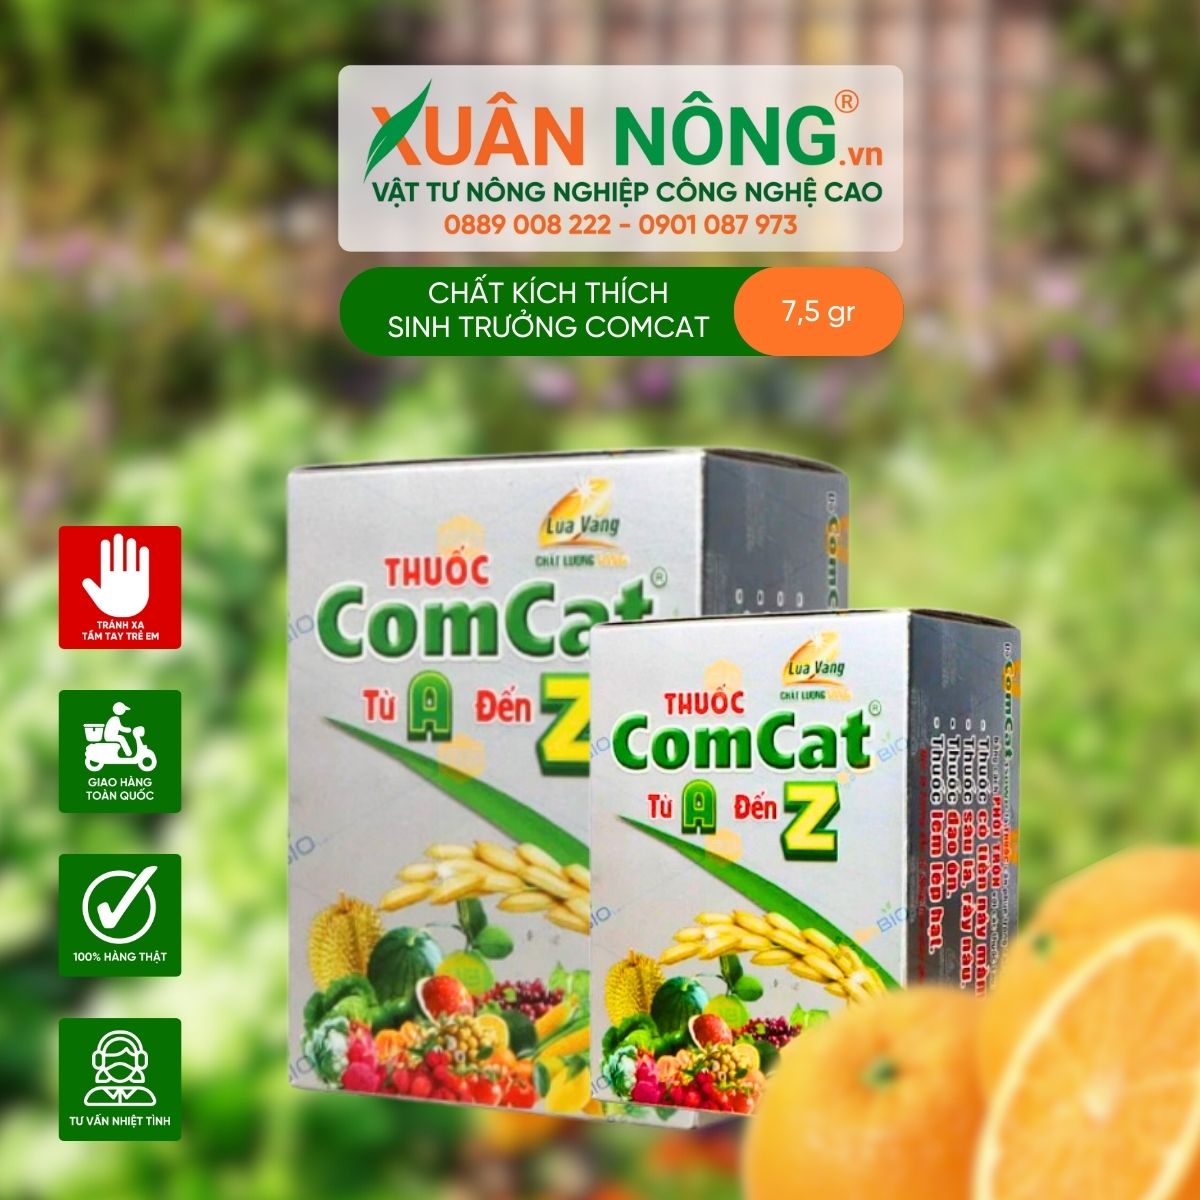 chat_kich_thich_sinh_truong_comcat.jpg